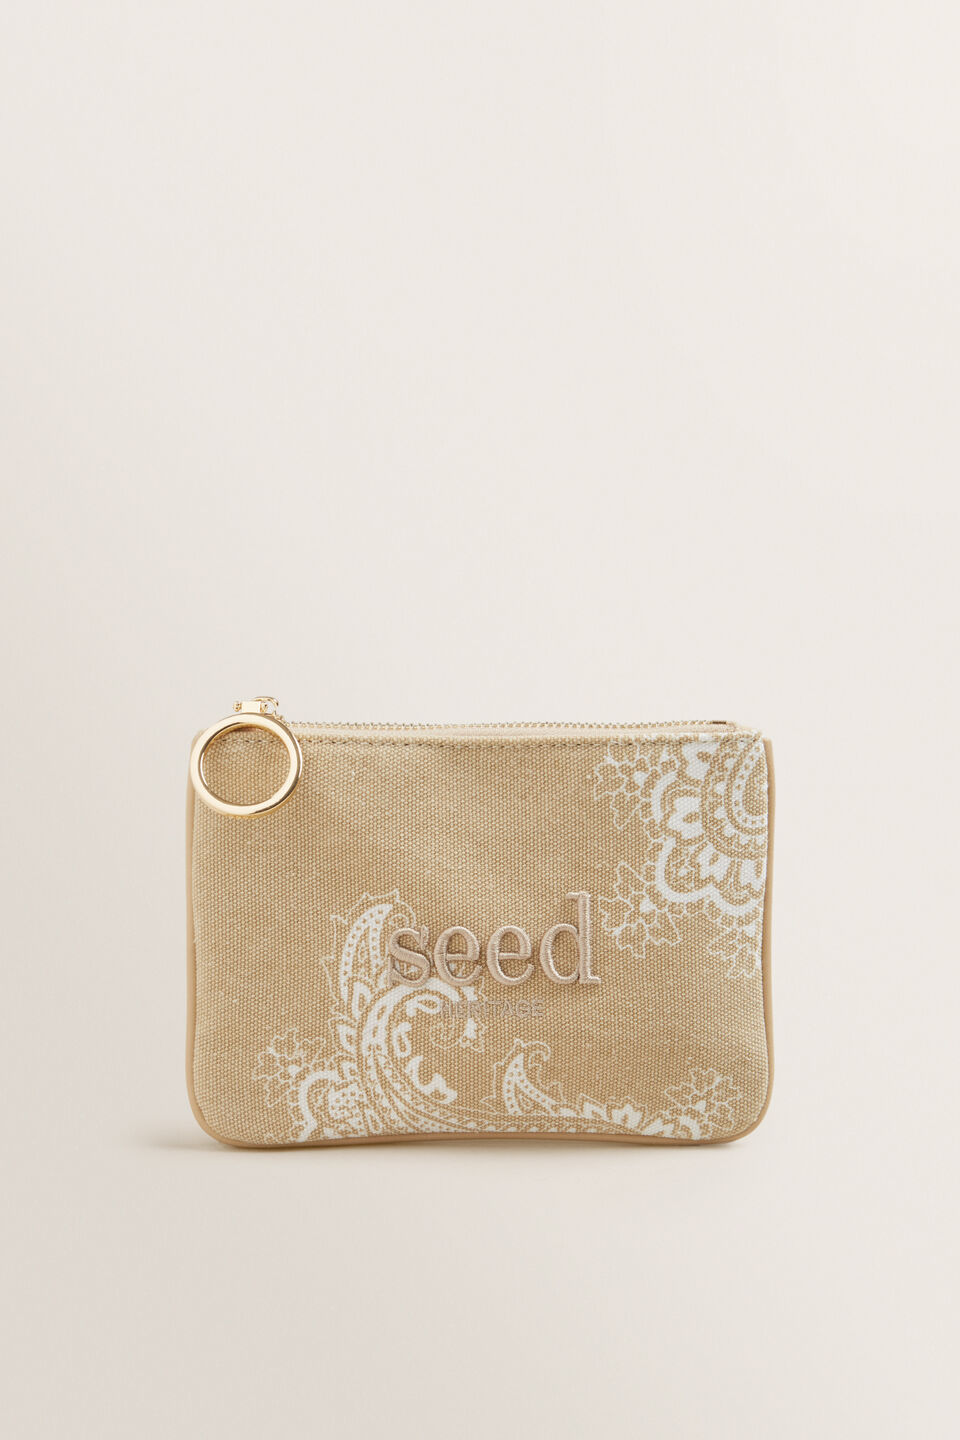 Seed Mini Canvas Pouch  Stonecrop